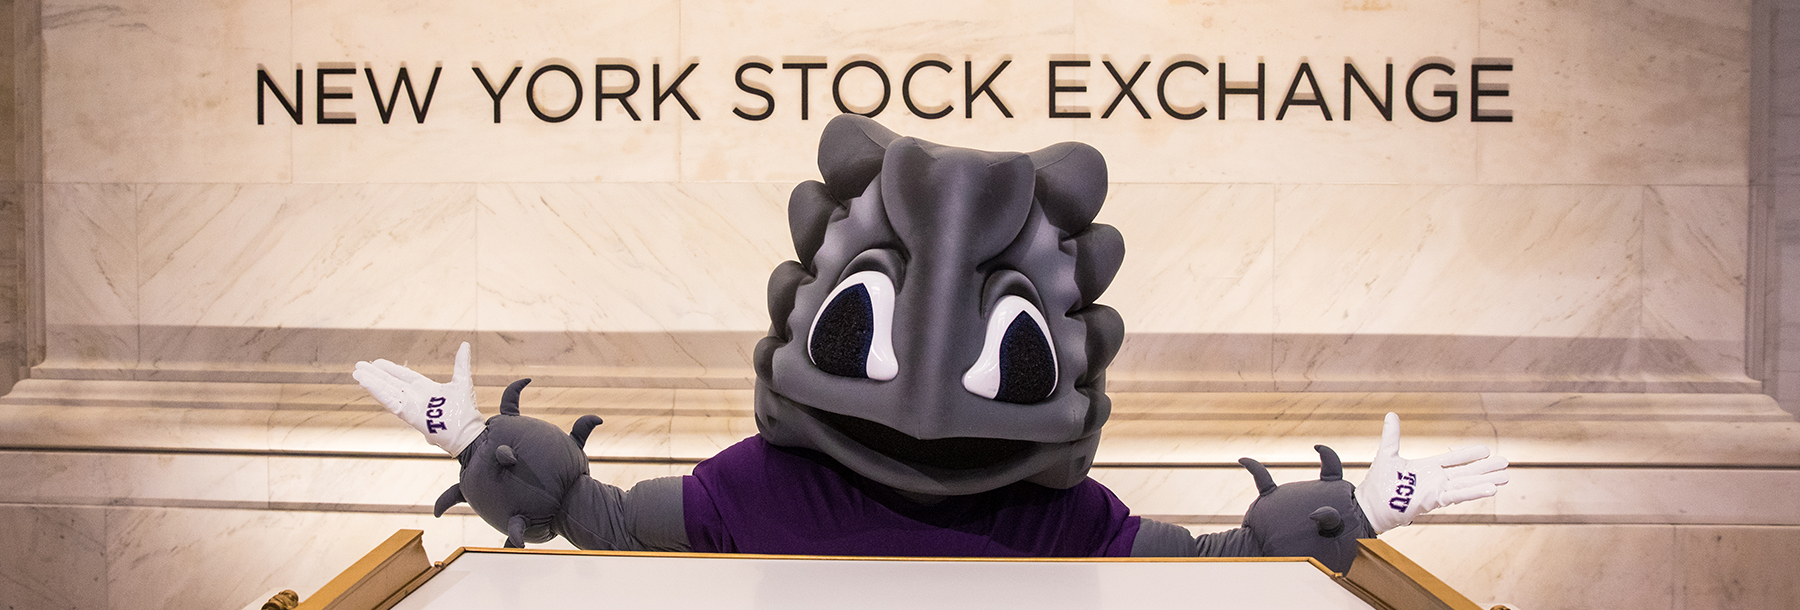 Section Image: SuperFrog at the New York Stock Exchange 